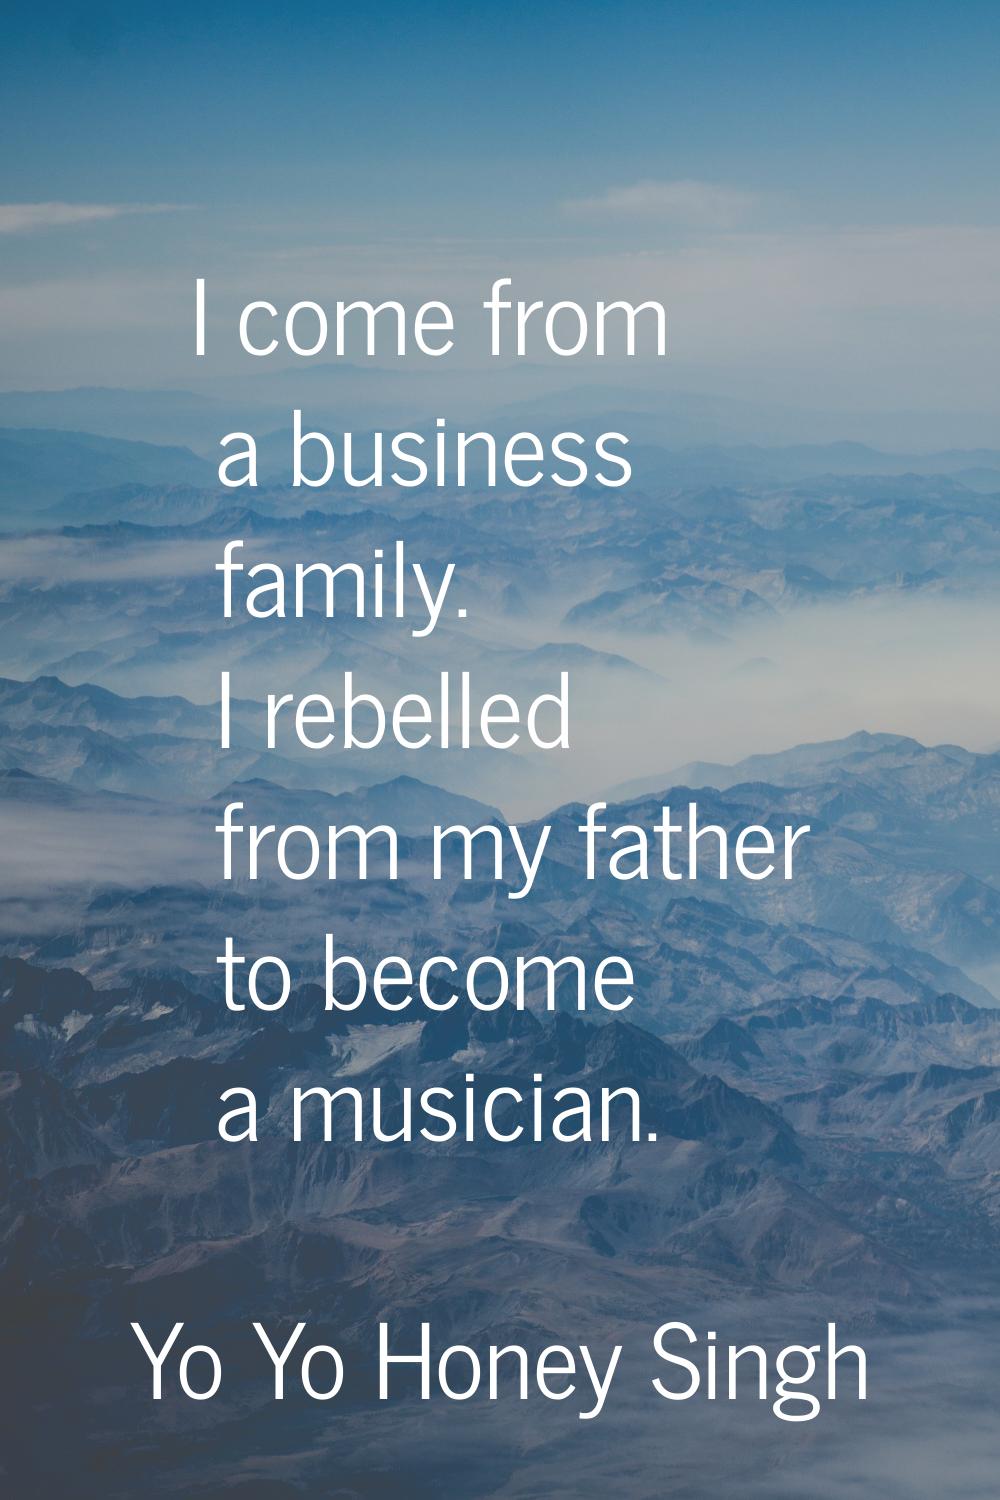 I come from a business family. I rebelled from my father to become a musician.